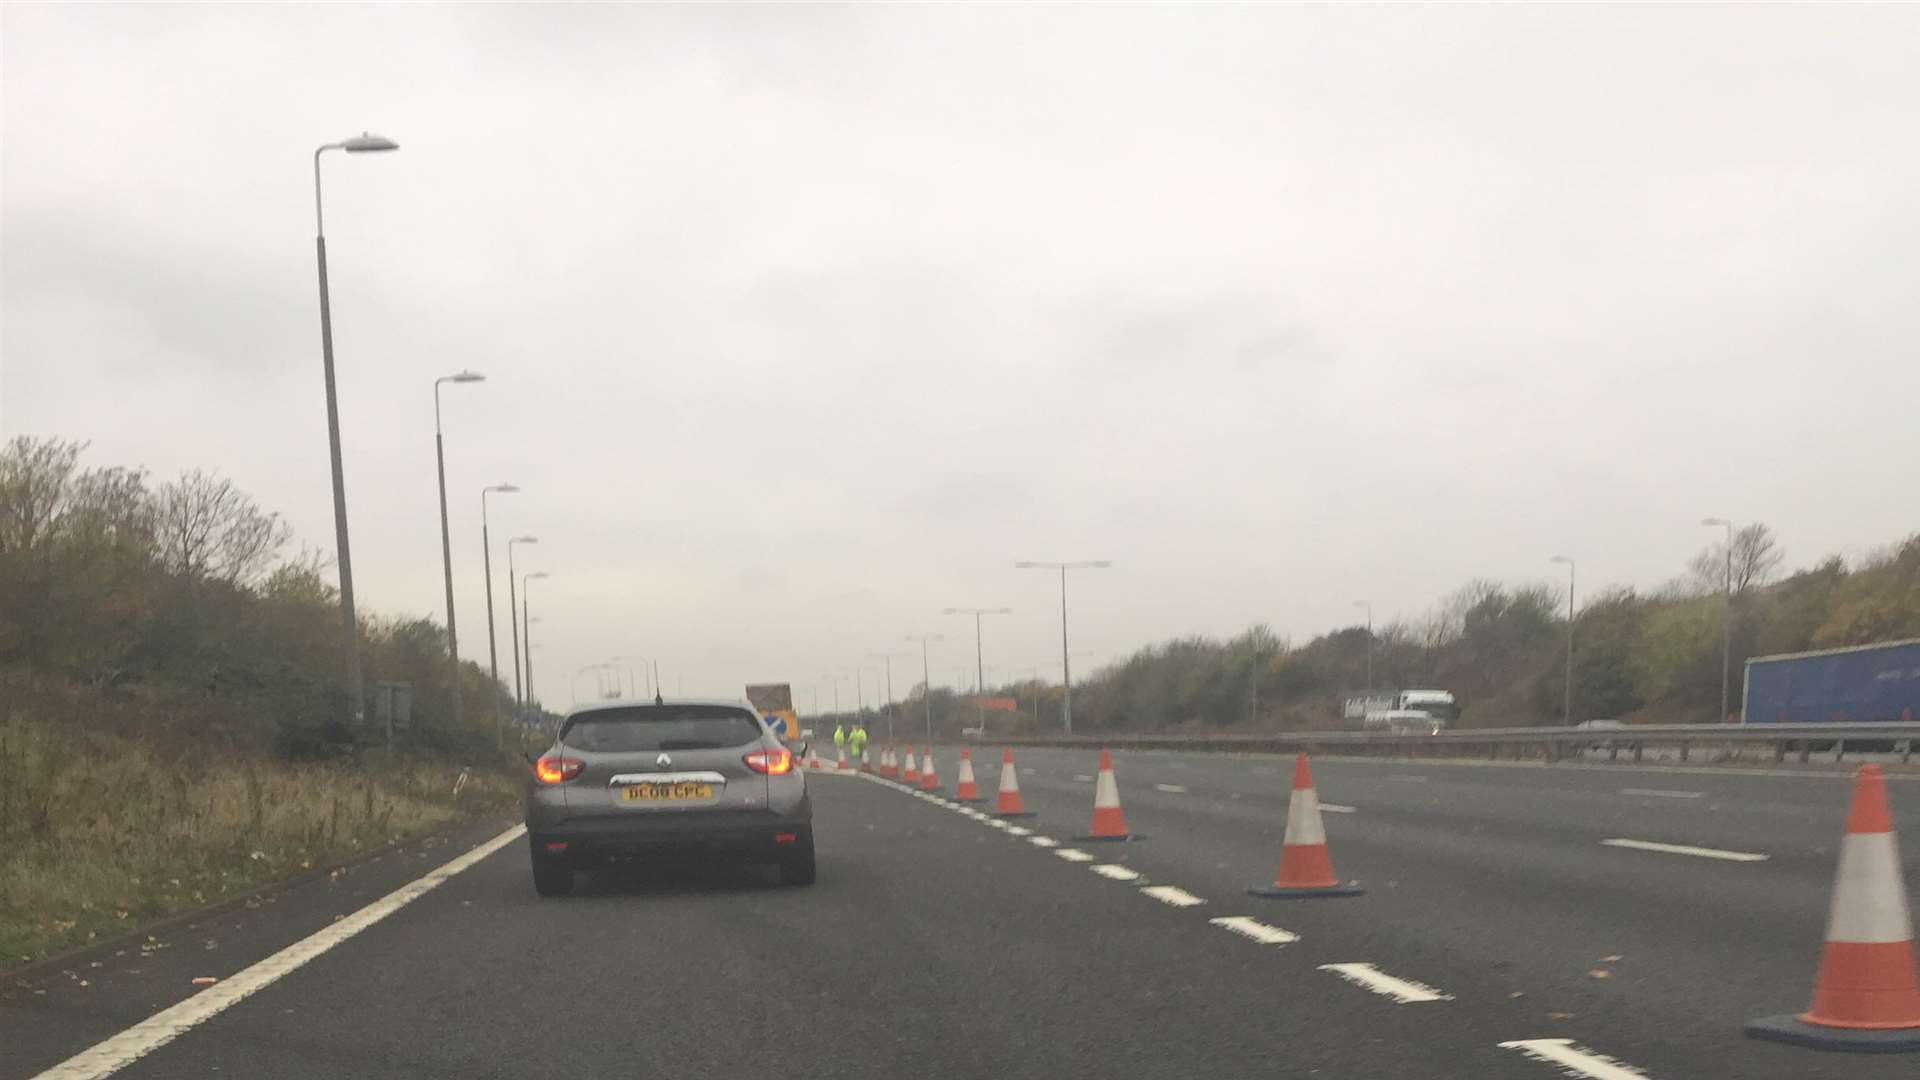 Traffic has been diverted off the M20 towards Sellindge all morning